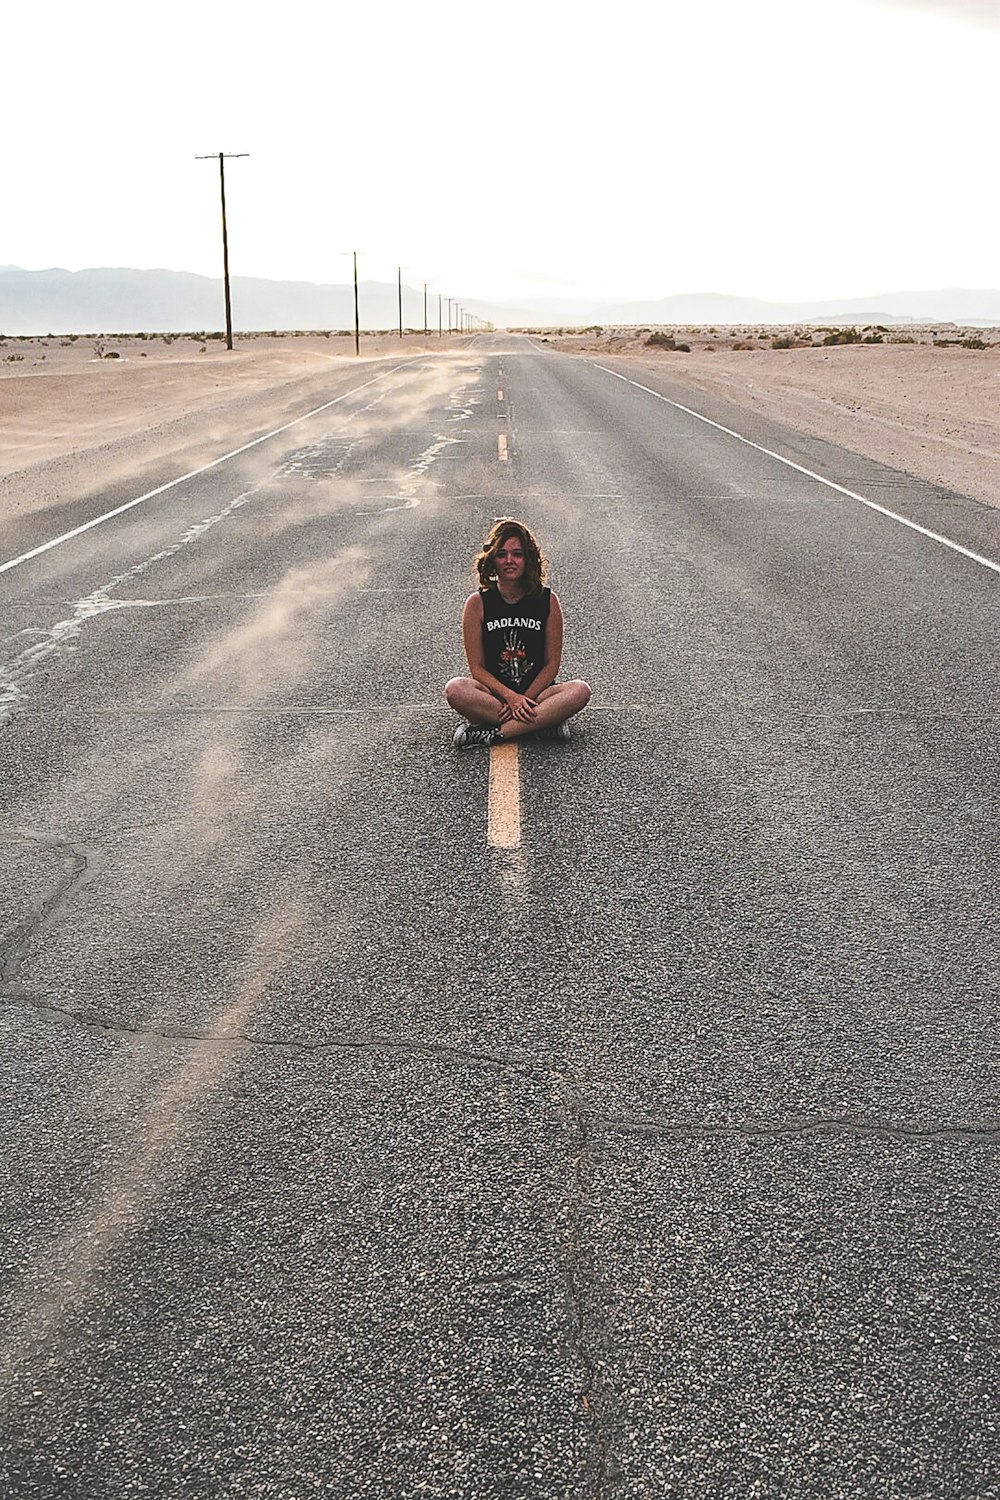 A girl sitting on yellow road line with her legs crossed.